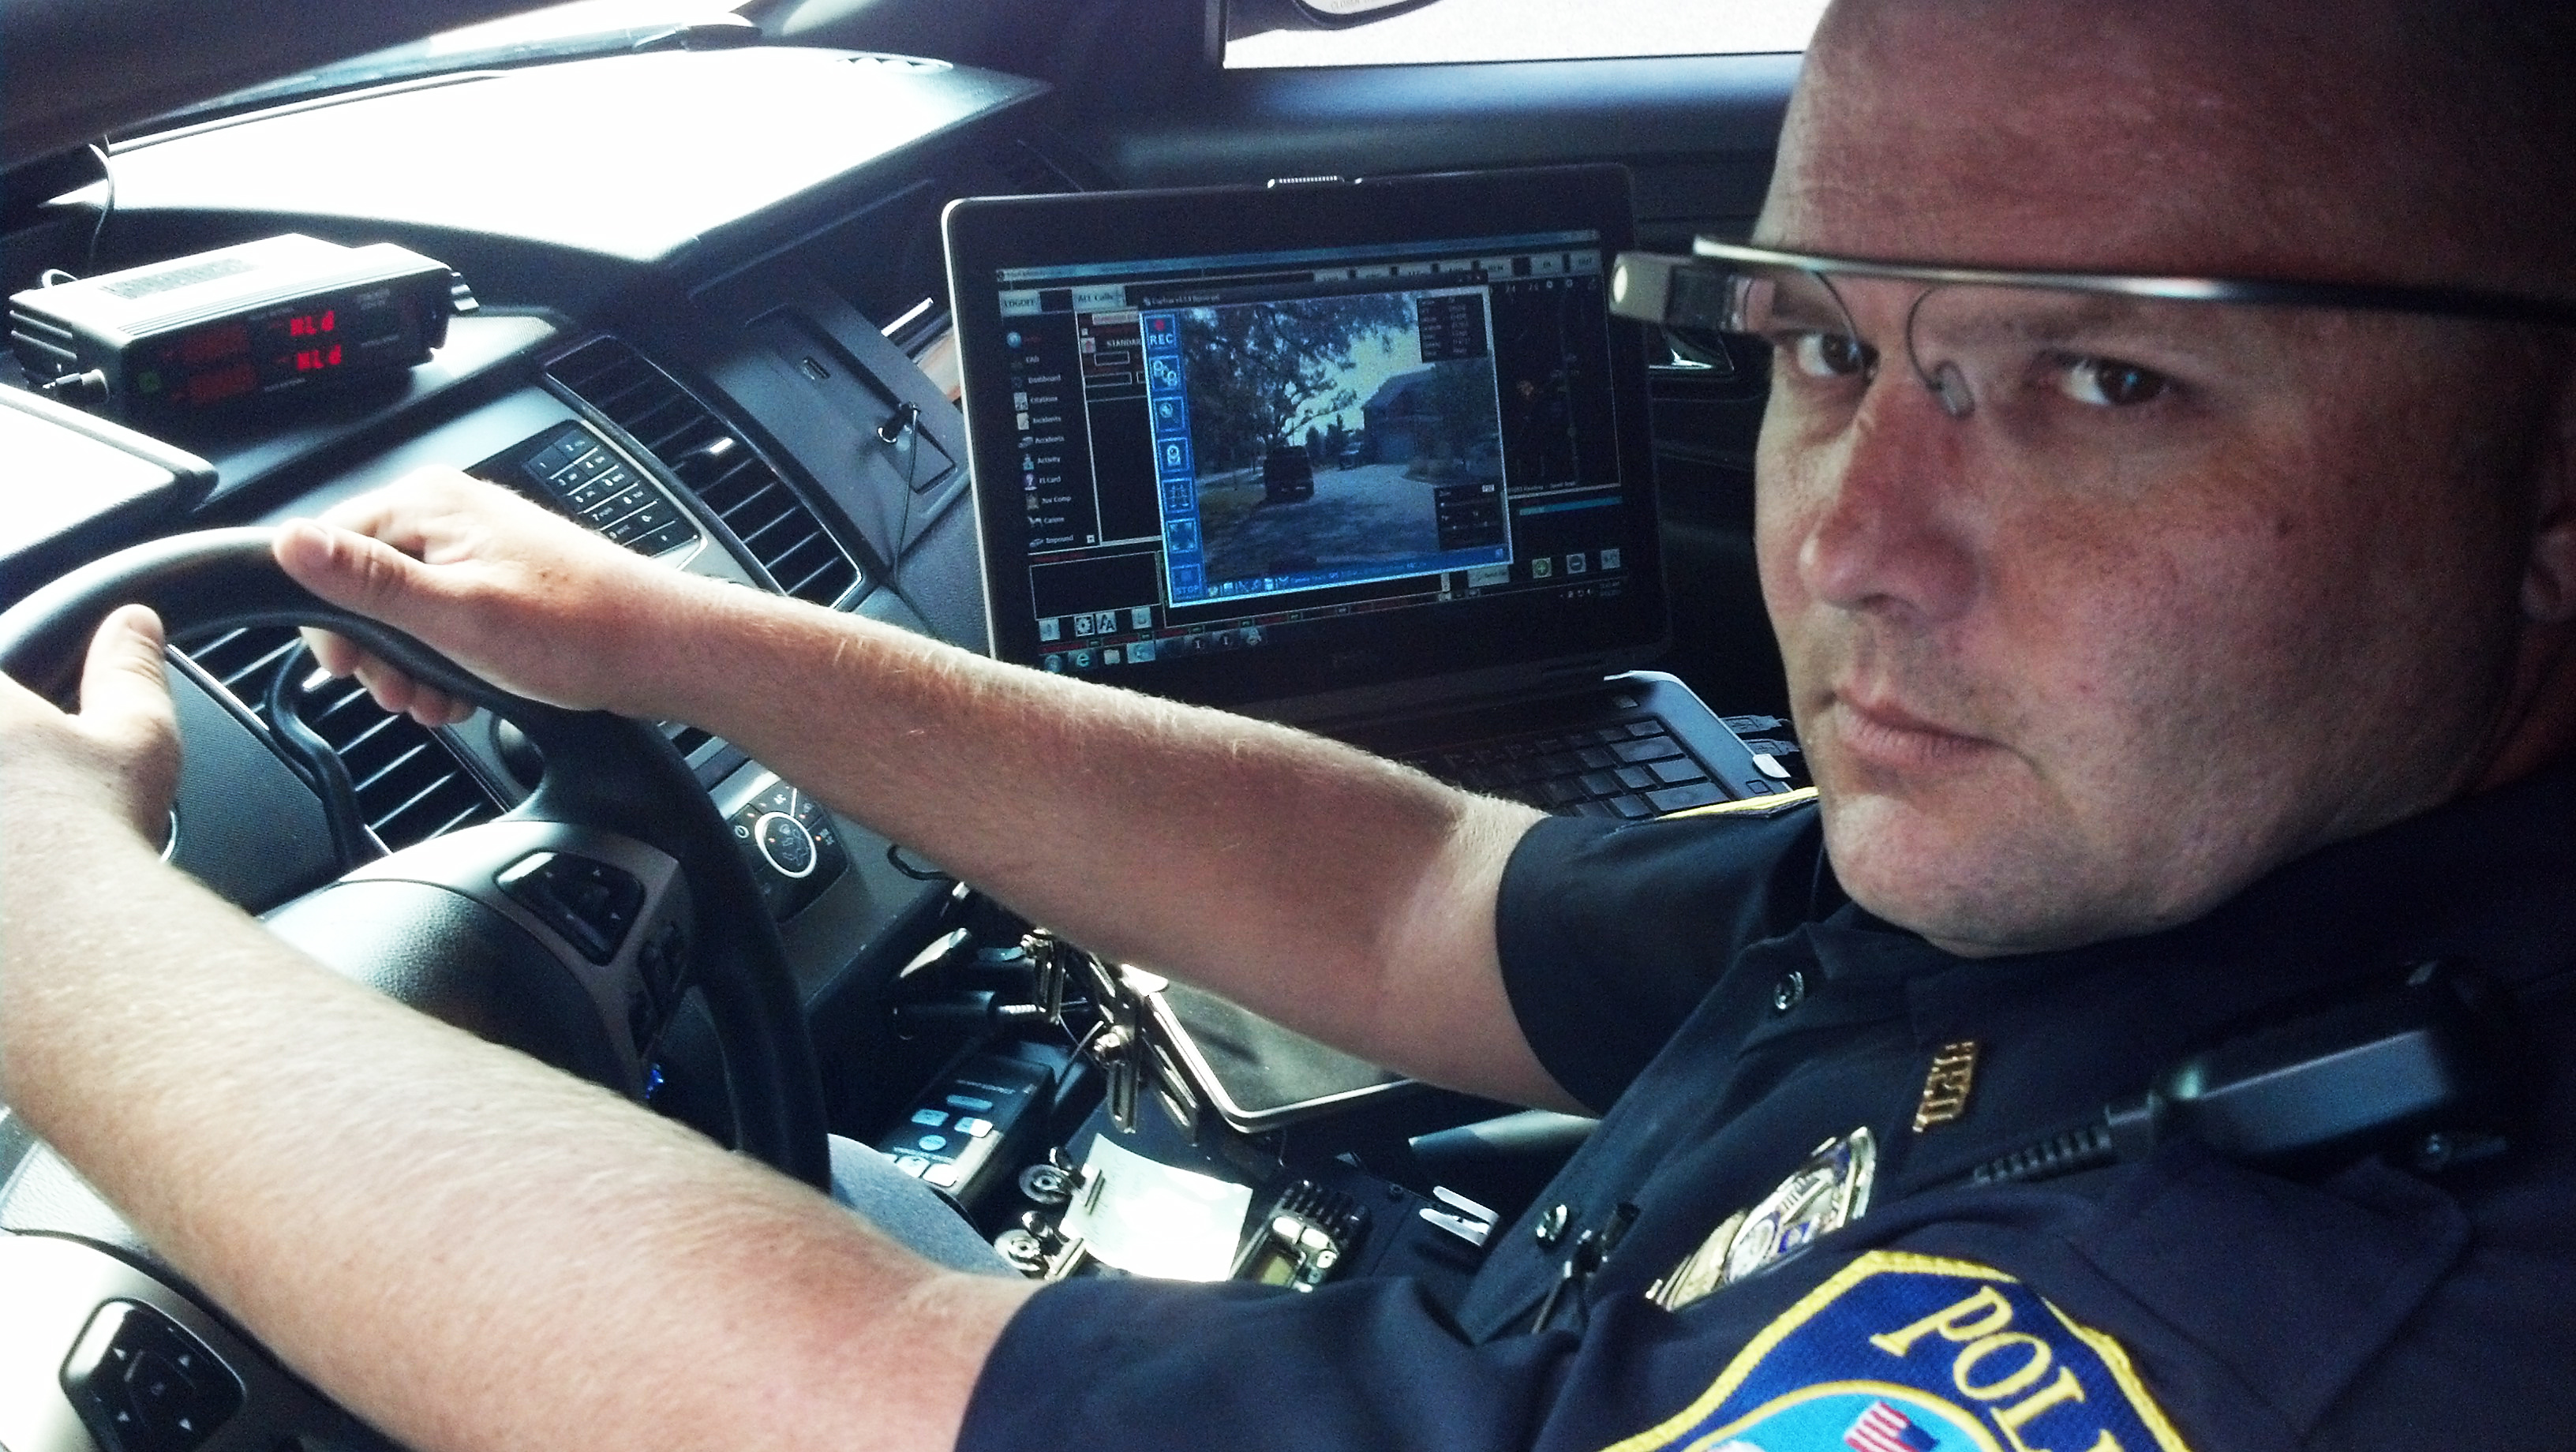 Sergeant Eric Ferris tested Google Glass with CopTrax while on patrol and traffic speed enforcement.